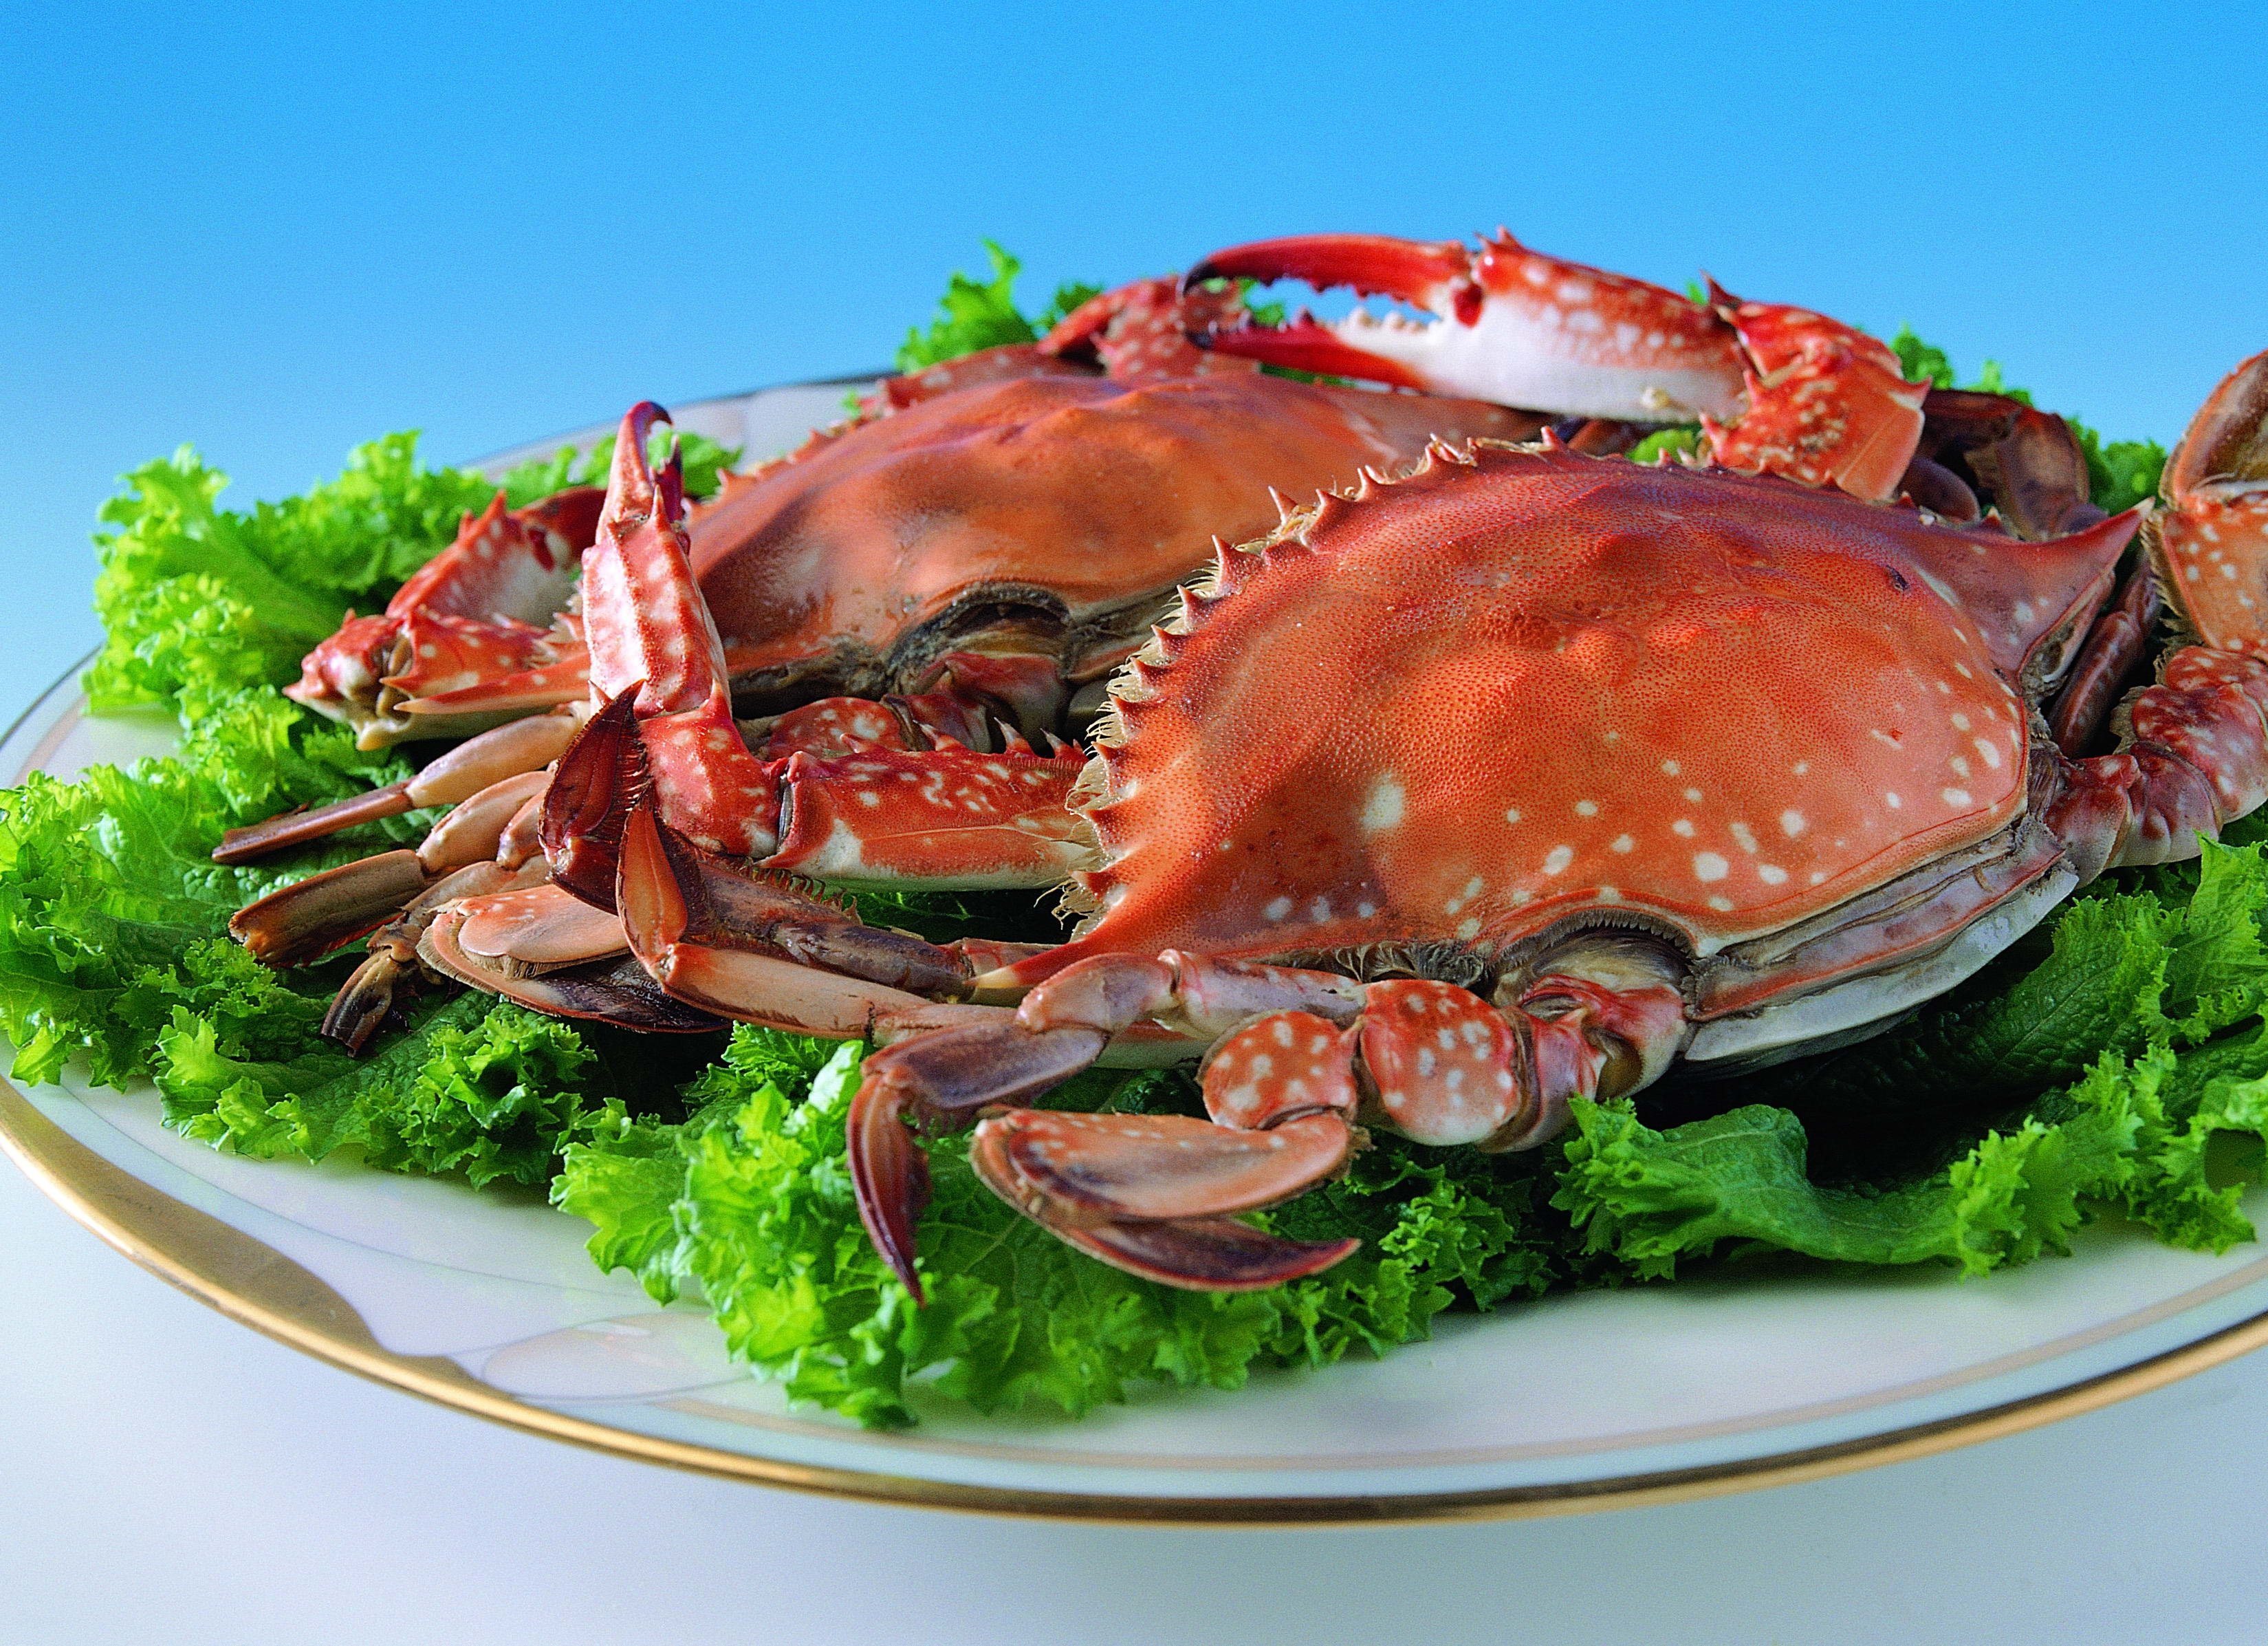 Wallpaper, food, fish, Plate, crabs, seafood, cabbage, parsley, dish, invertebrate, animal source foods, decapoda, crustacean, dungeness crab, spiny lobster, king crab, soft shell crab 3298x2393